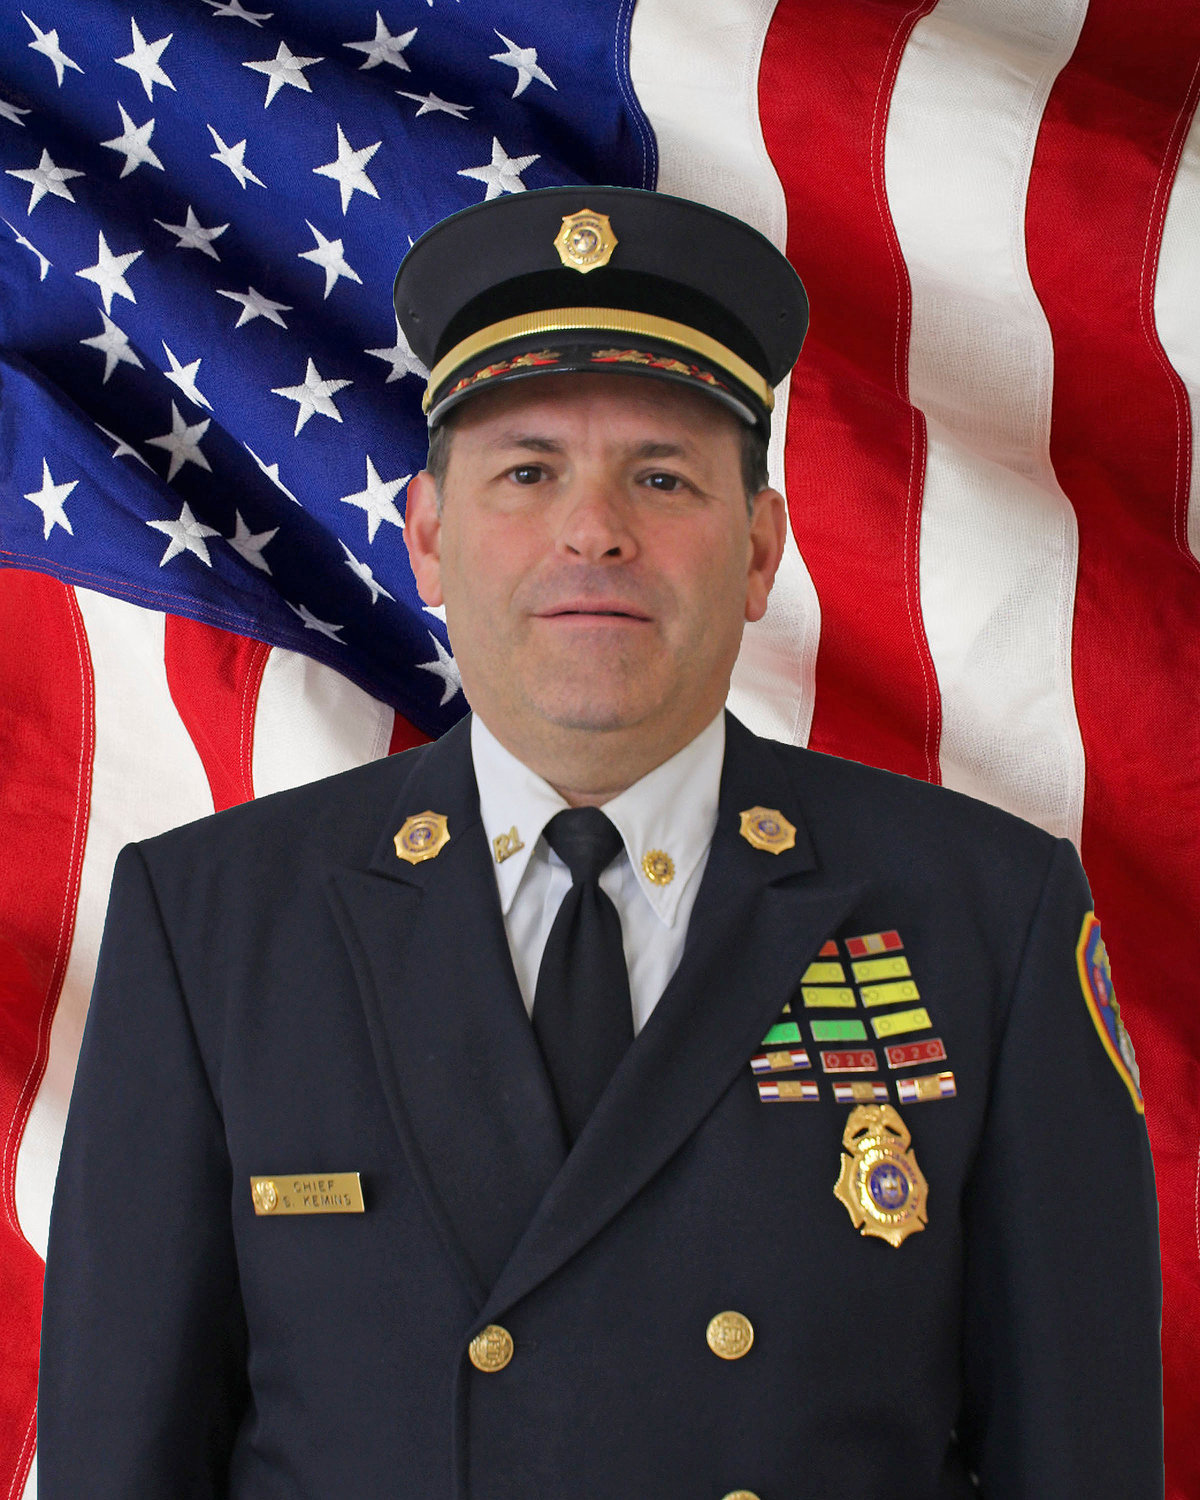 L.B. Fire Chief Scott Kemins is to be honored by MSSN for service.